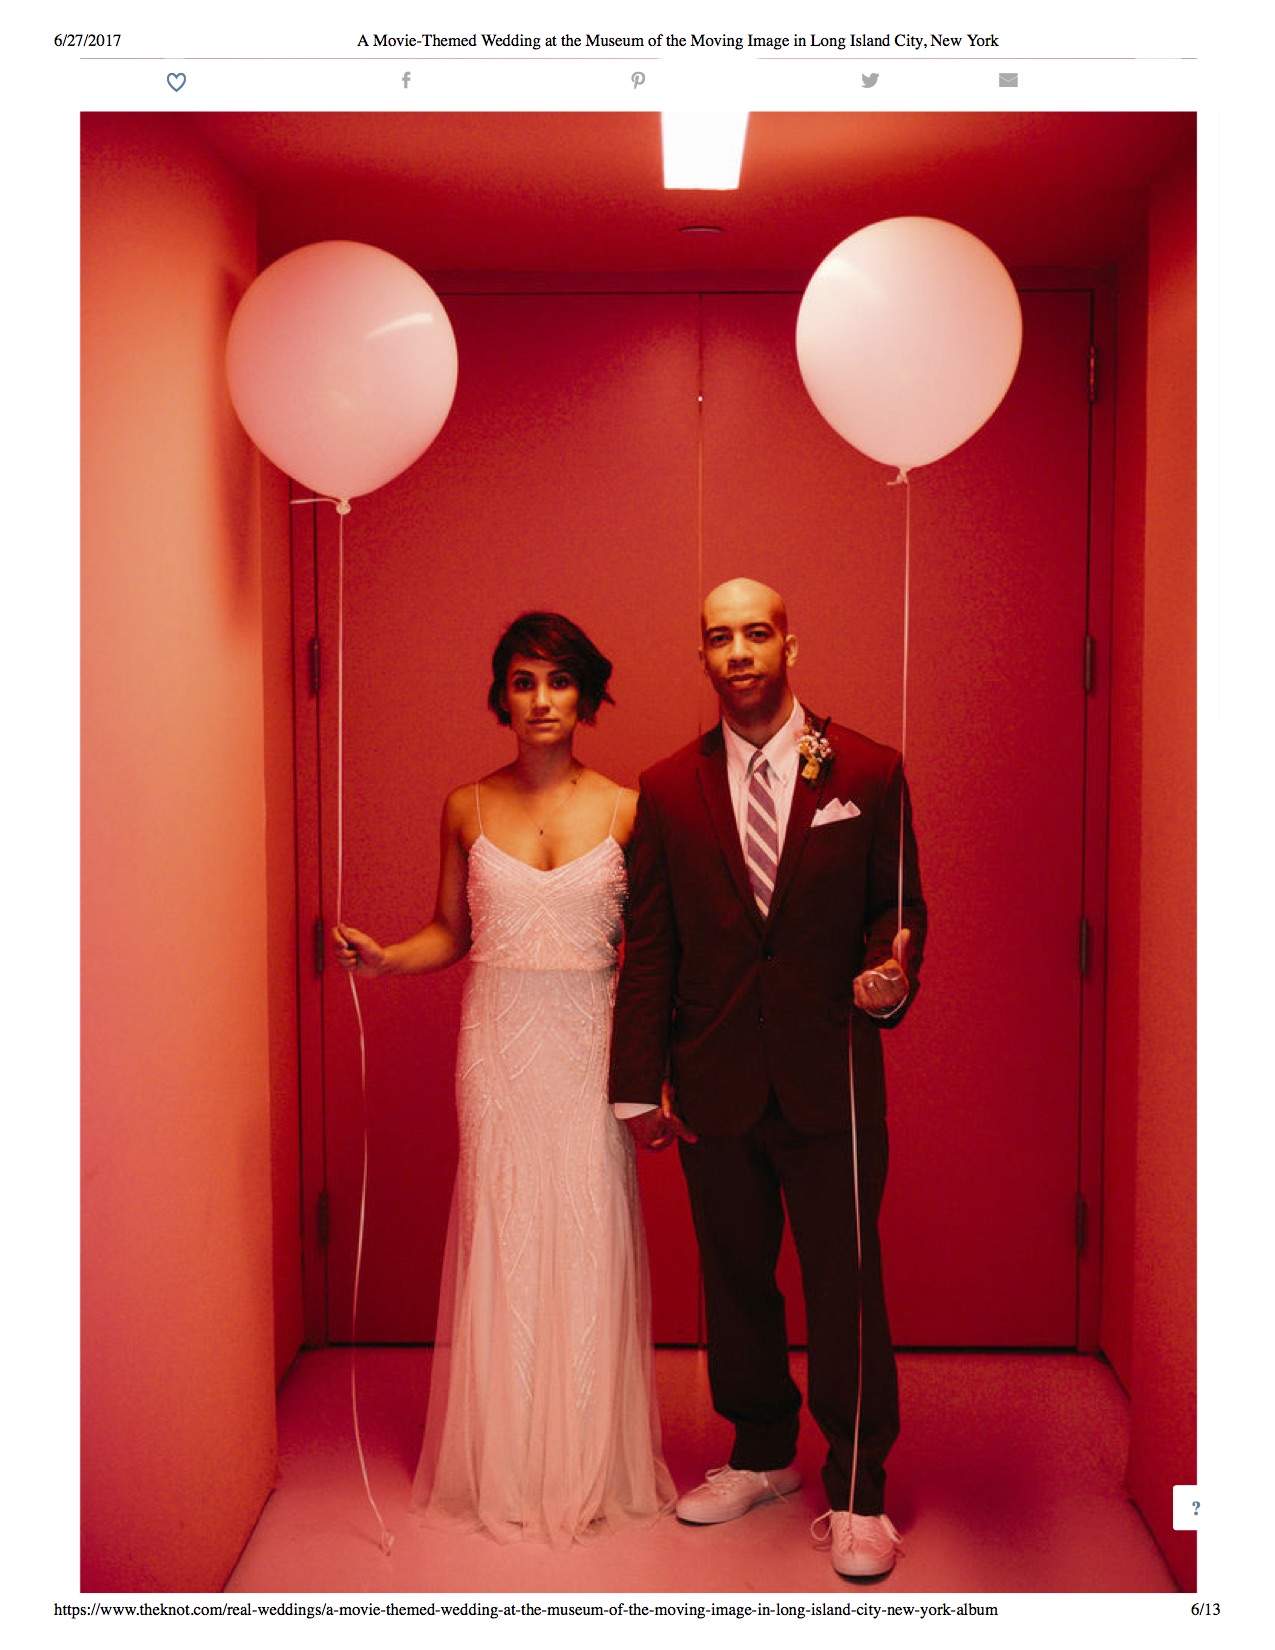 6A Movie-Themed Wedding at the Museum of the Moving Image in Long Island City, New York.jpg